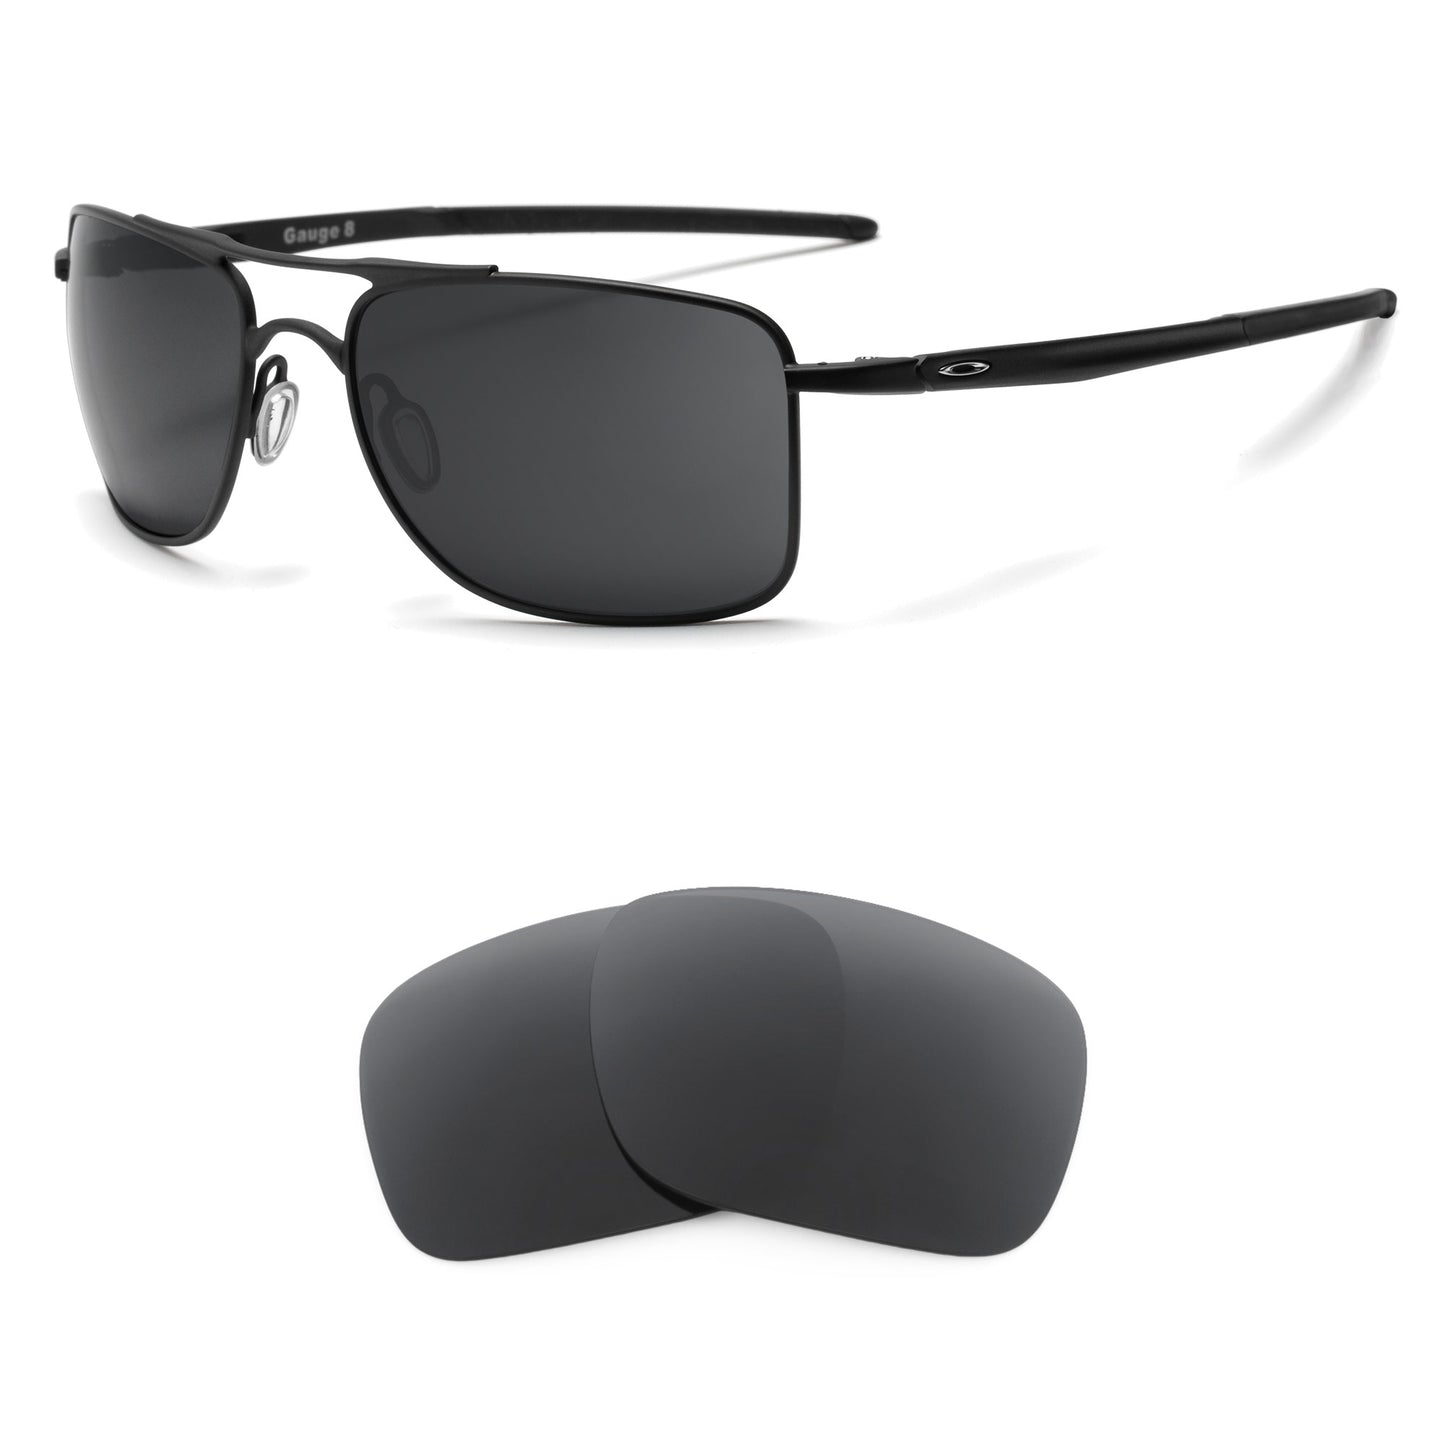 Oakley Gauge 8 M sunglasses with replacement lenses